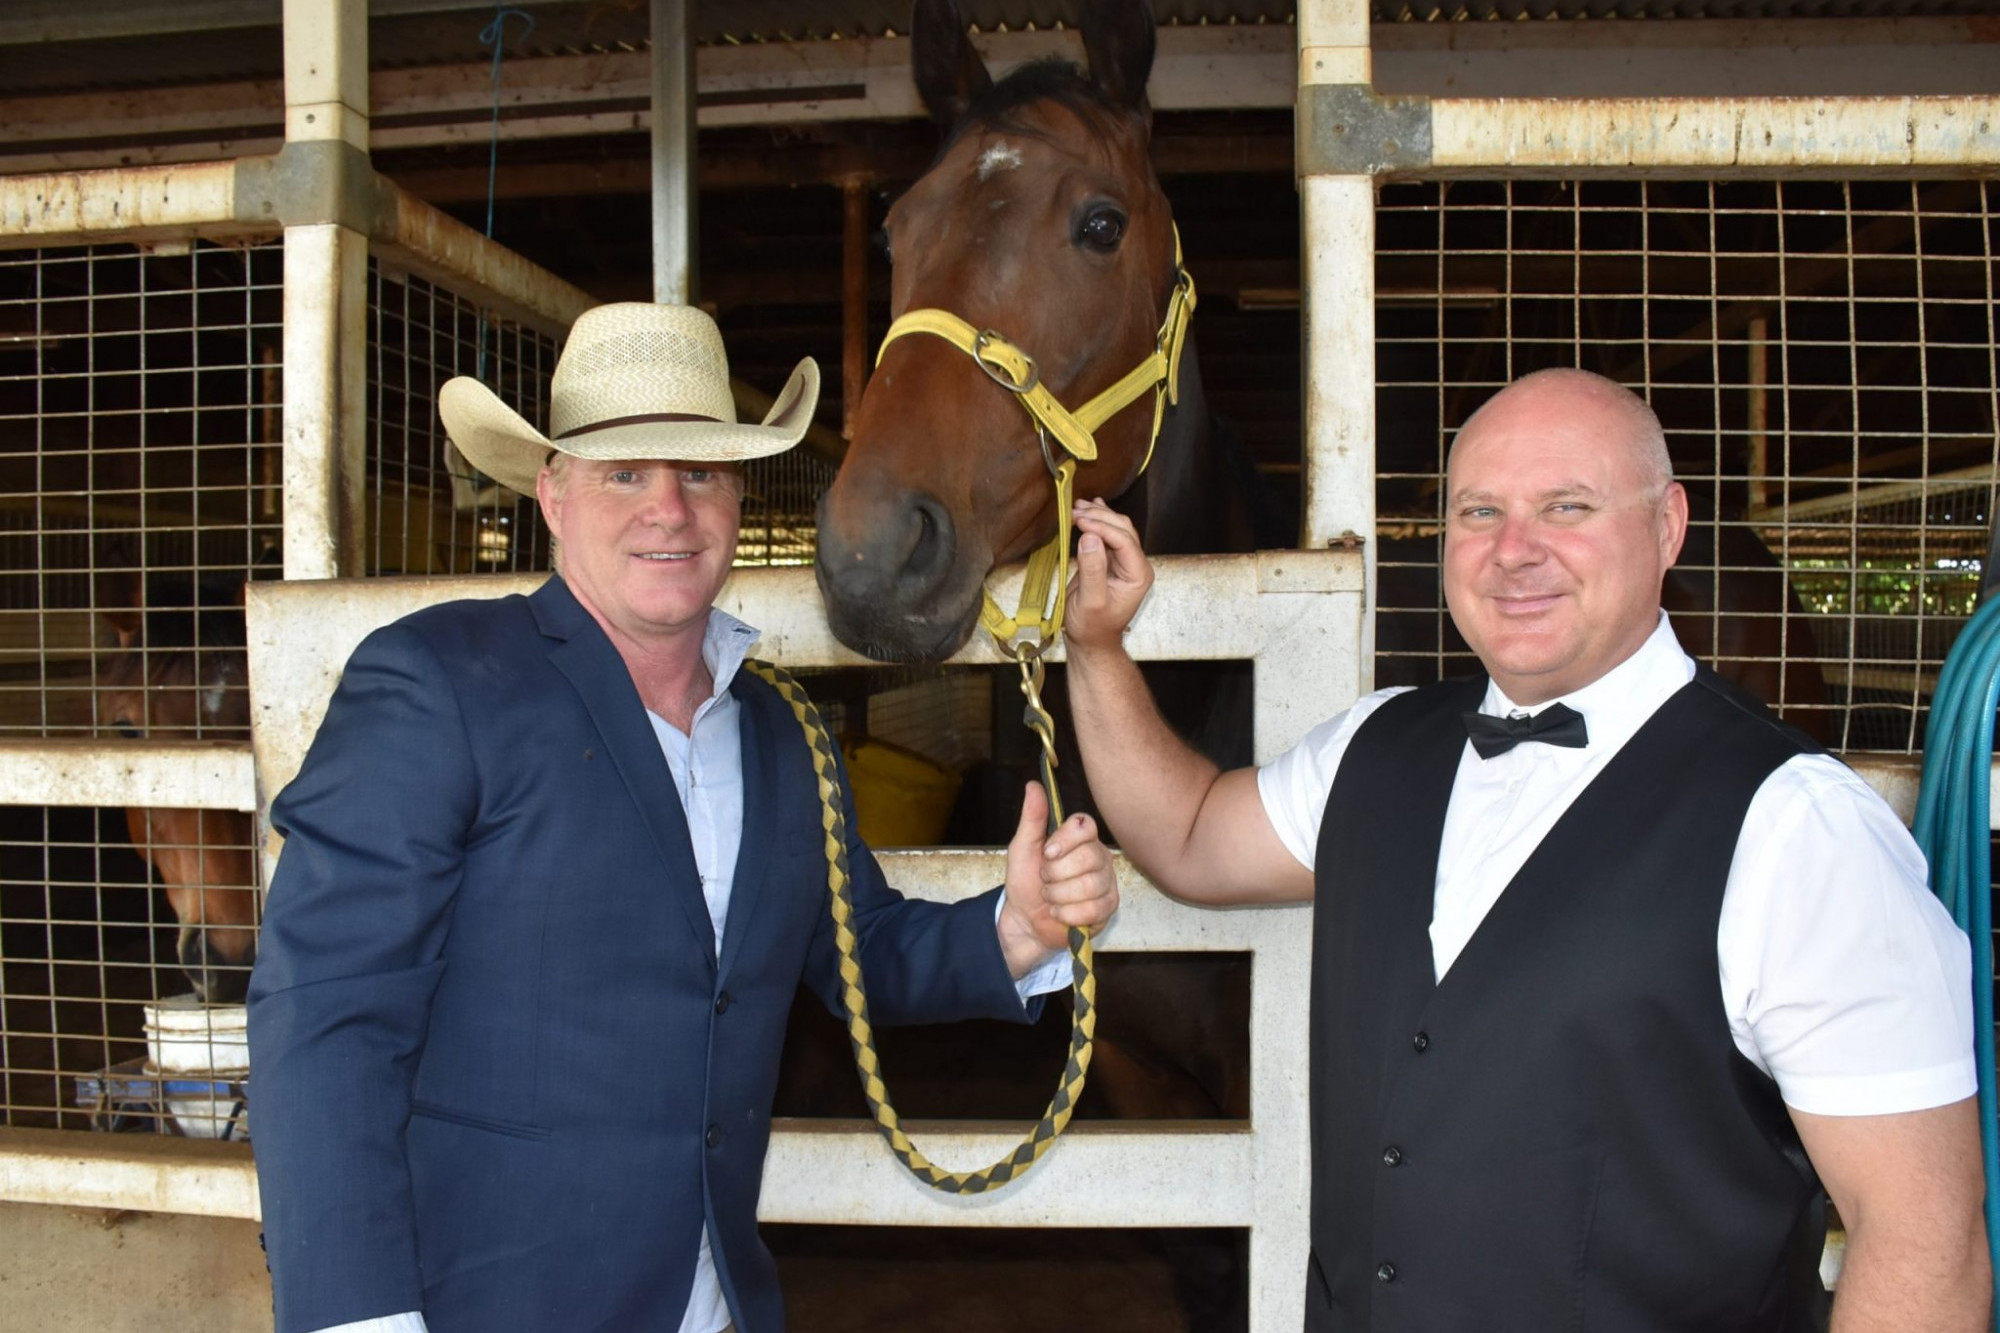 President of Mareeba Turf Club Alex Malliff, with Cairns Cup winner Paniagua and Neil Setford President of Mareeba Friends of the Hospital Foundation who are looking forward to the 2020 Melbourne Cup.